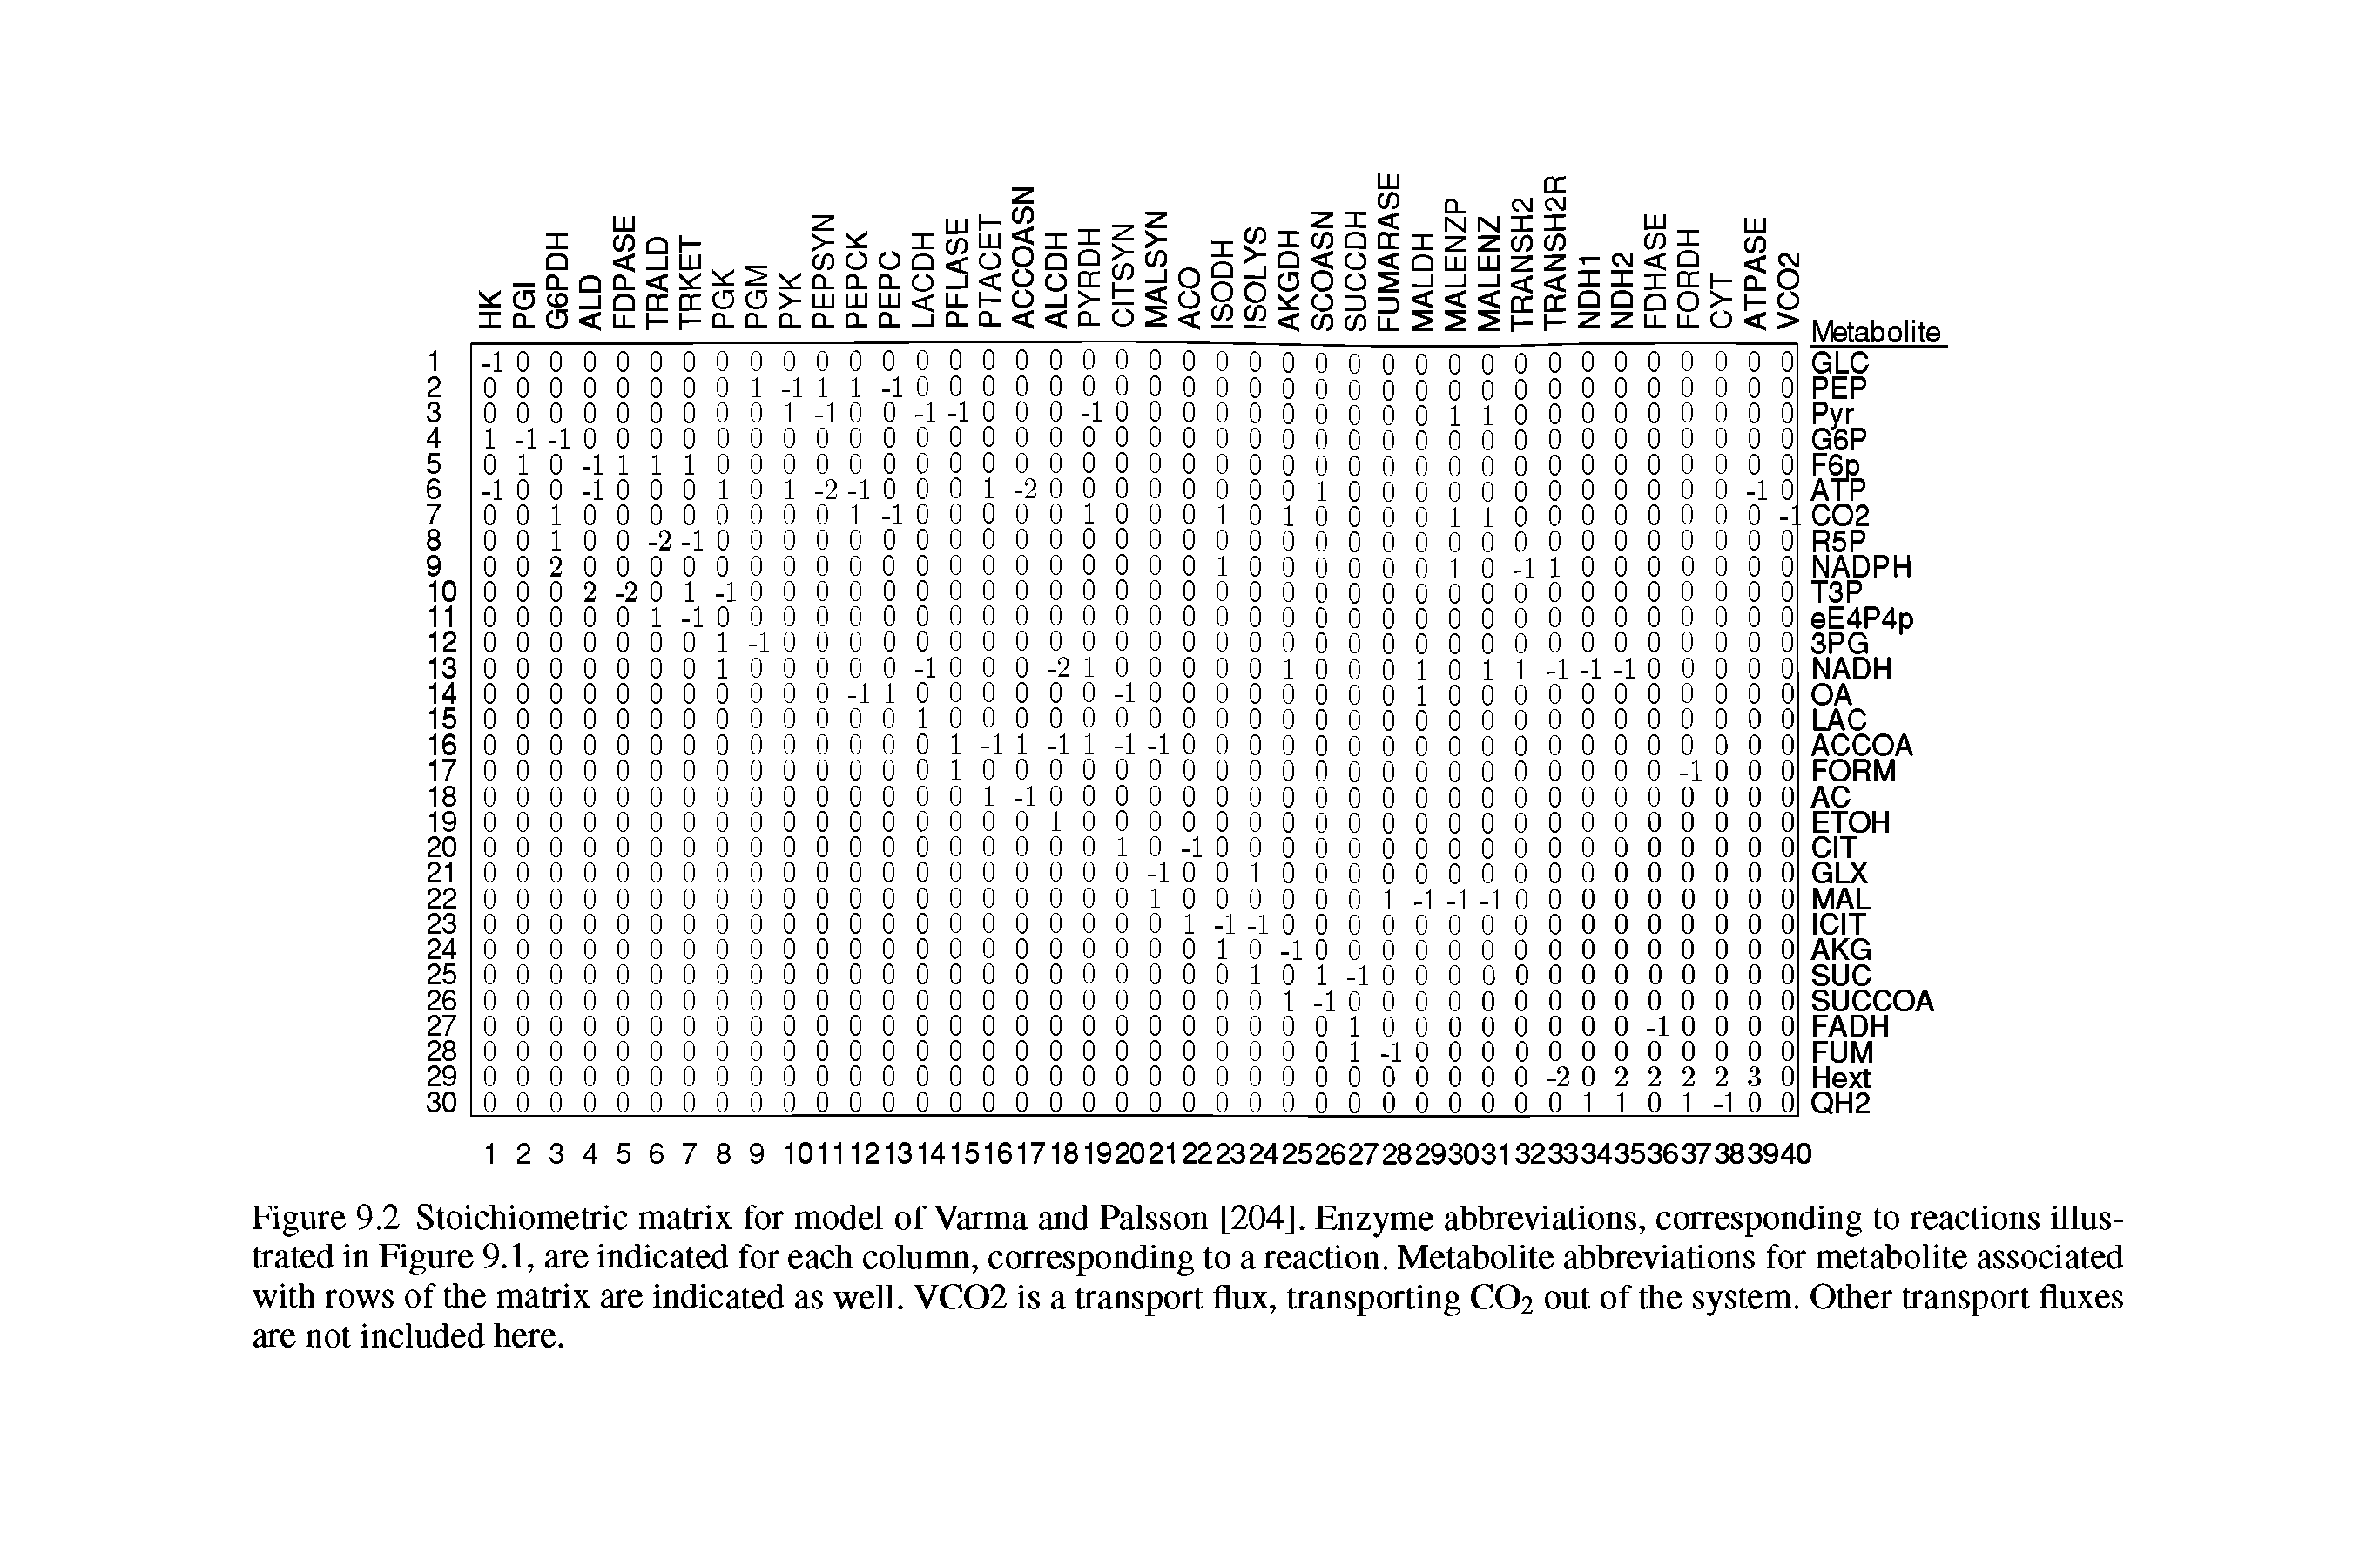 Figure 9.2 Stoichiometric matrix for model of Varma and Palsson [204], Enzyme abbreviations, corresponding to reactions illustrated in Figure 9.1, are indicated for each column, corresponding to a reaction. Metabolite abbreviations for metabolite associated with rows of the matrix are indicated as well. VC02 is a transport flux, transporting CO2 out of the system. Other transport fluxes are not included here.